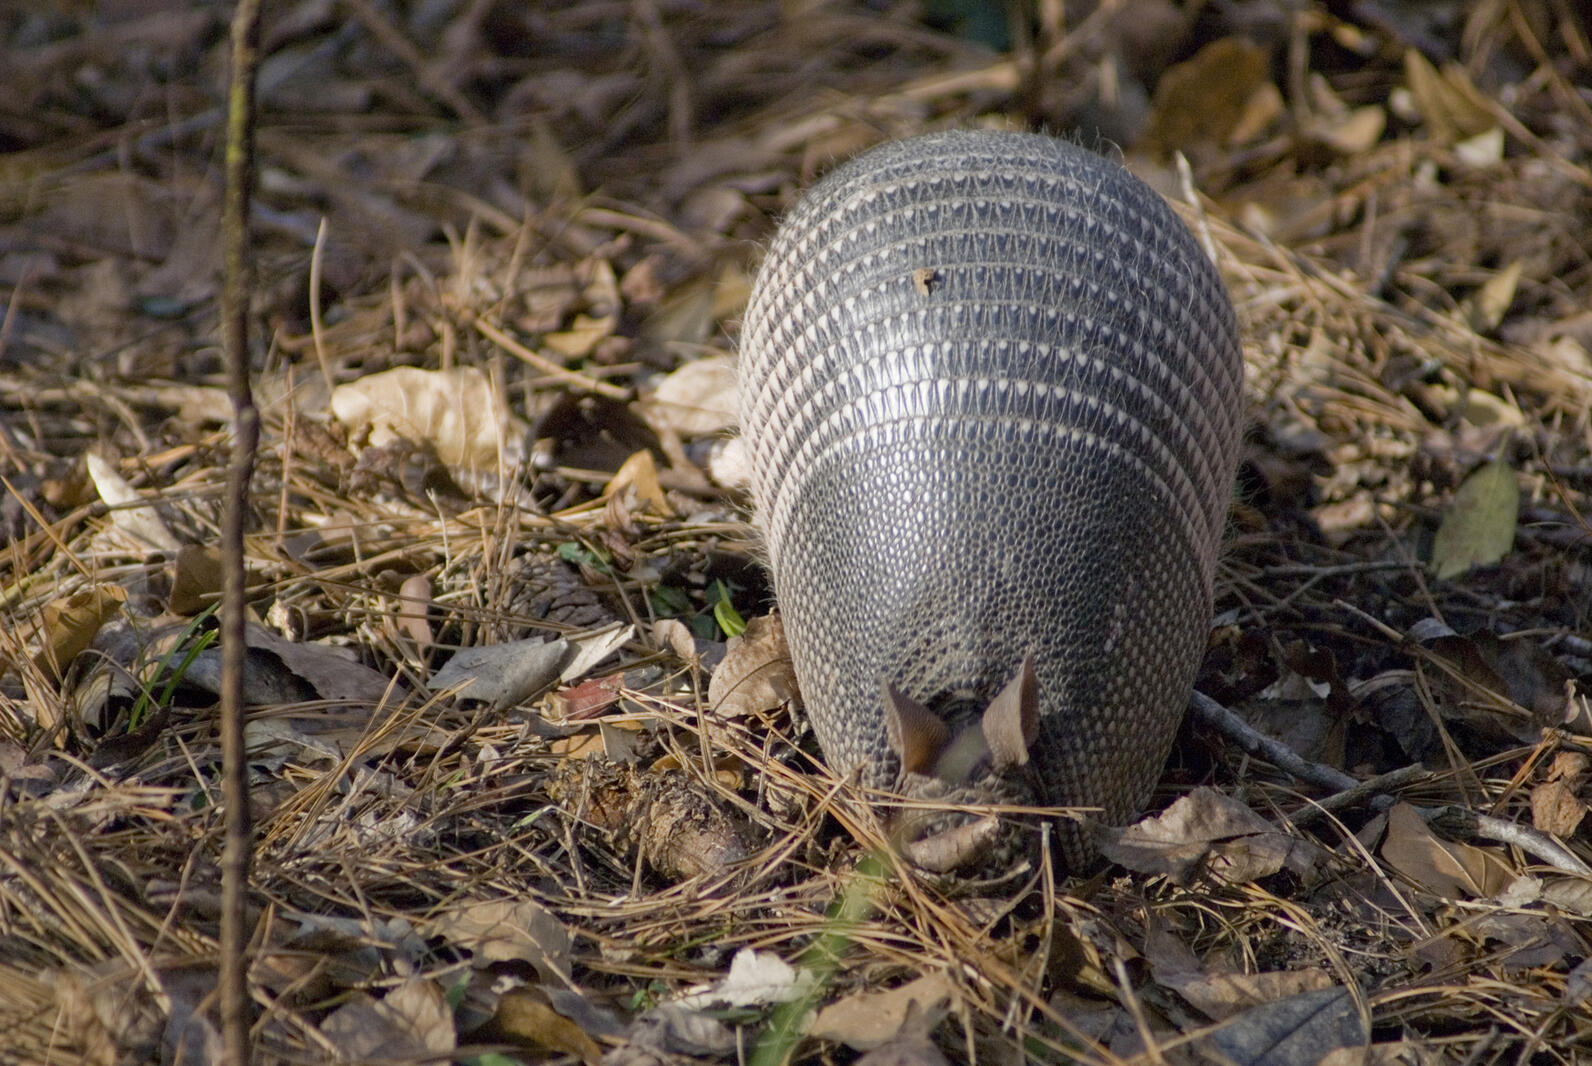 An armadillo faces you, it's head buried in the leaves. While its ears are raised, it's not likely to hear you over all the rustling it's making.